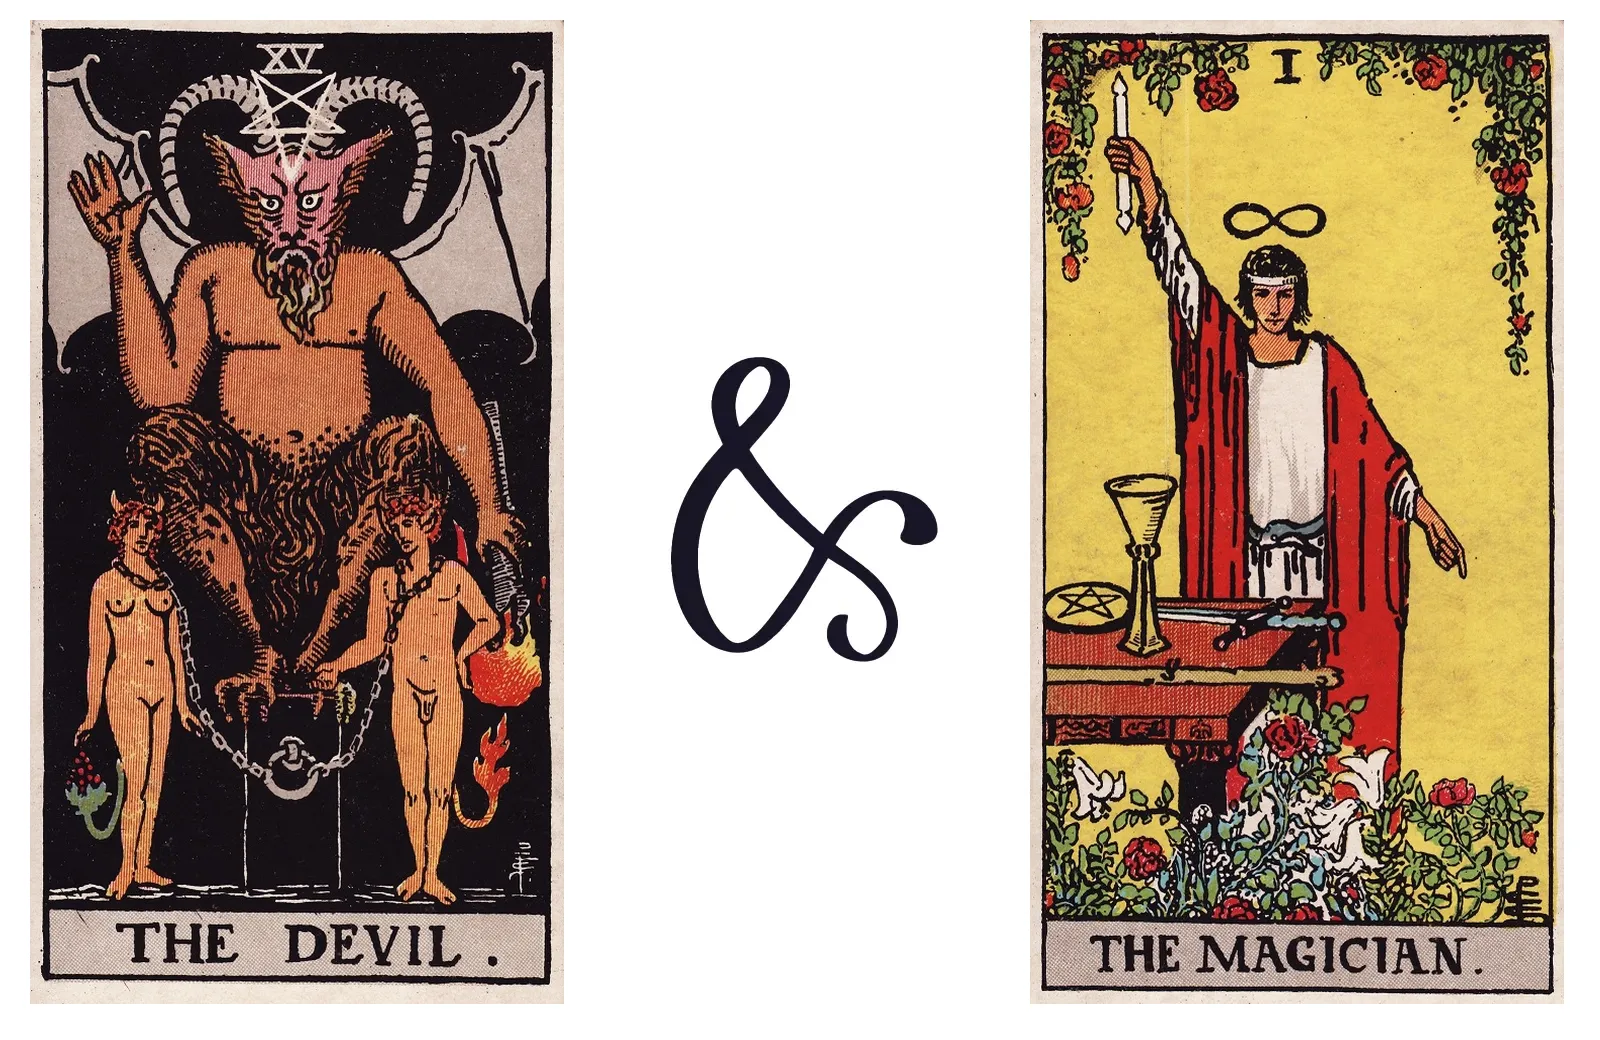 The Devil and The Magician